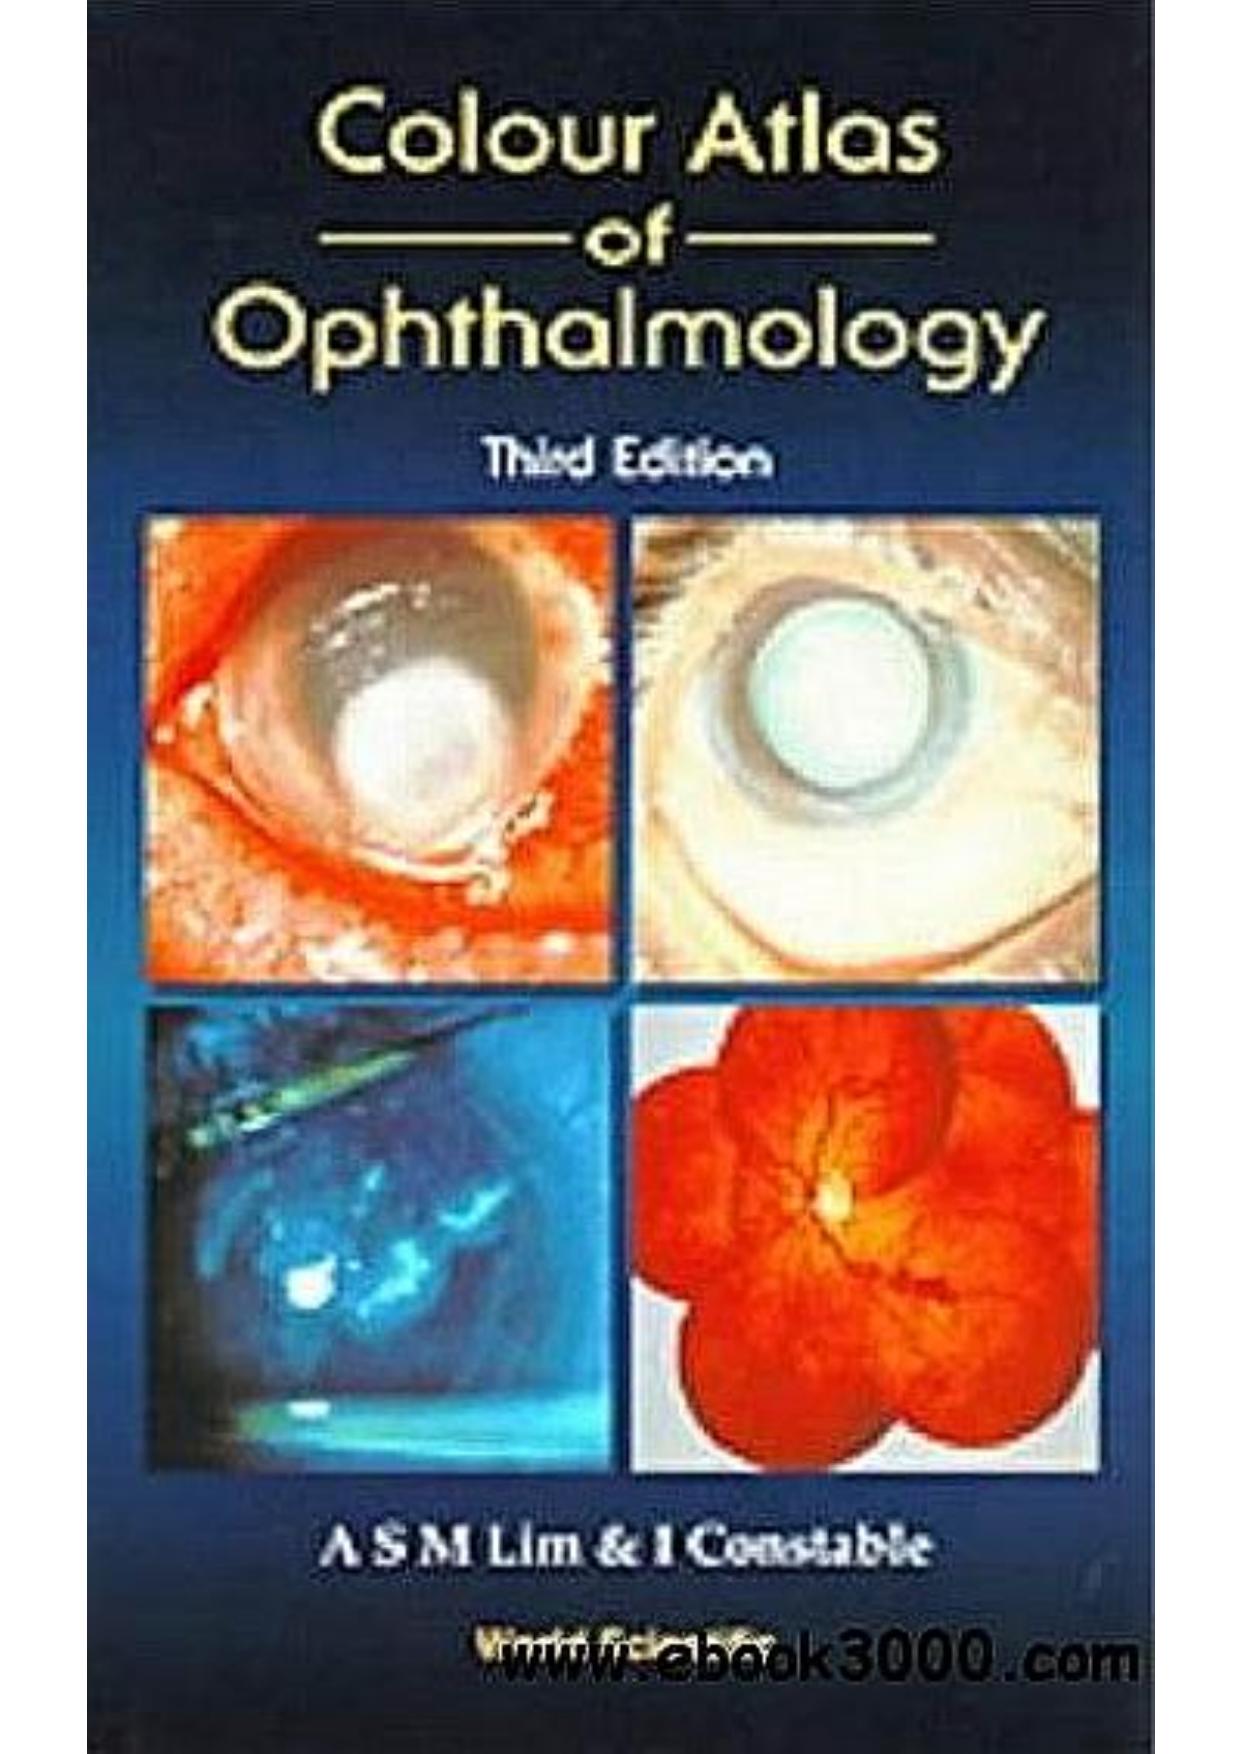 Colour Atlas of Ophthalmology (3rd Ed.)